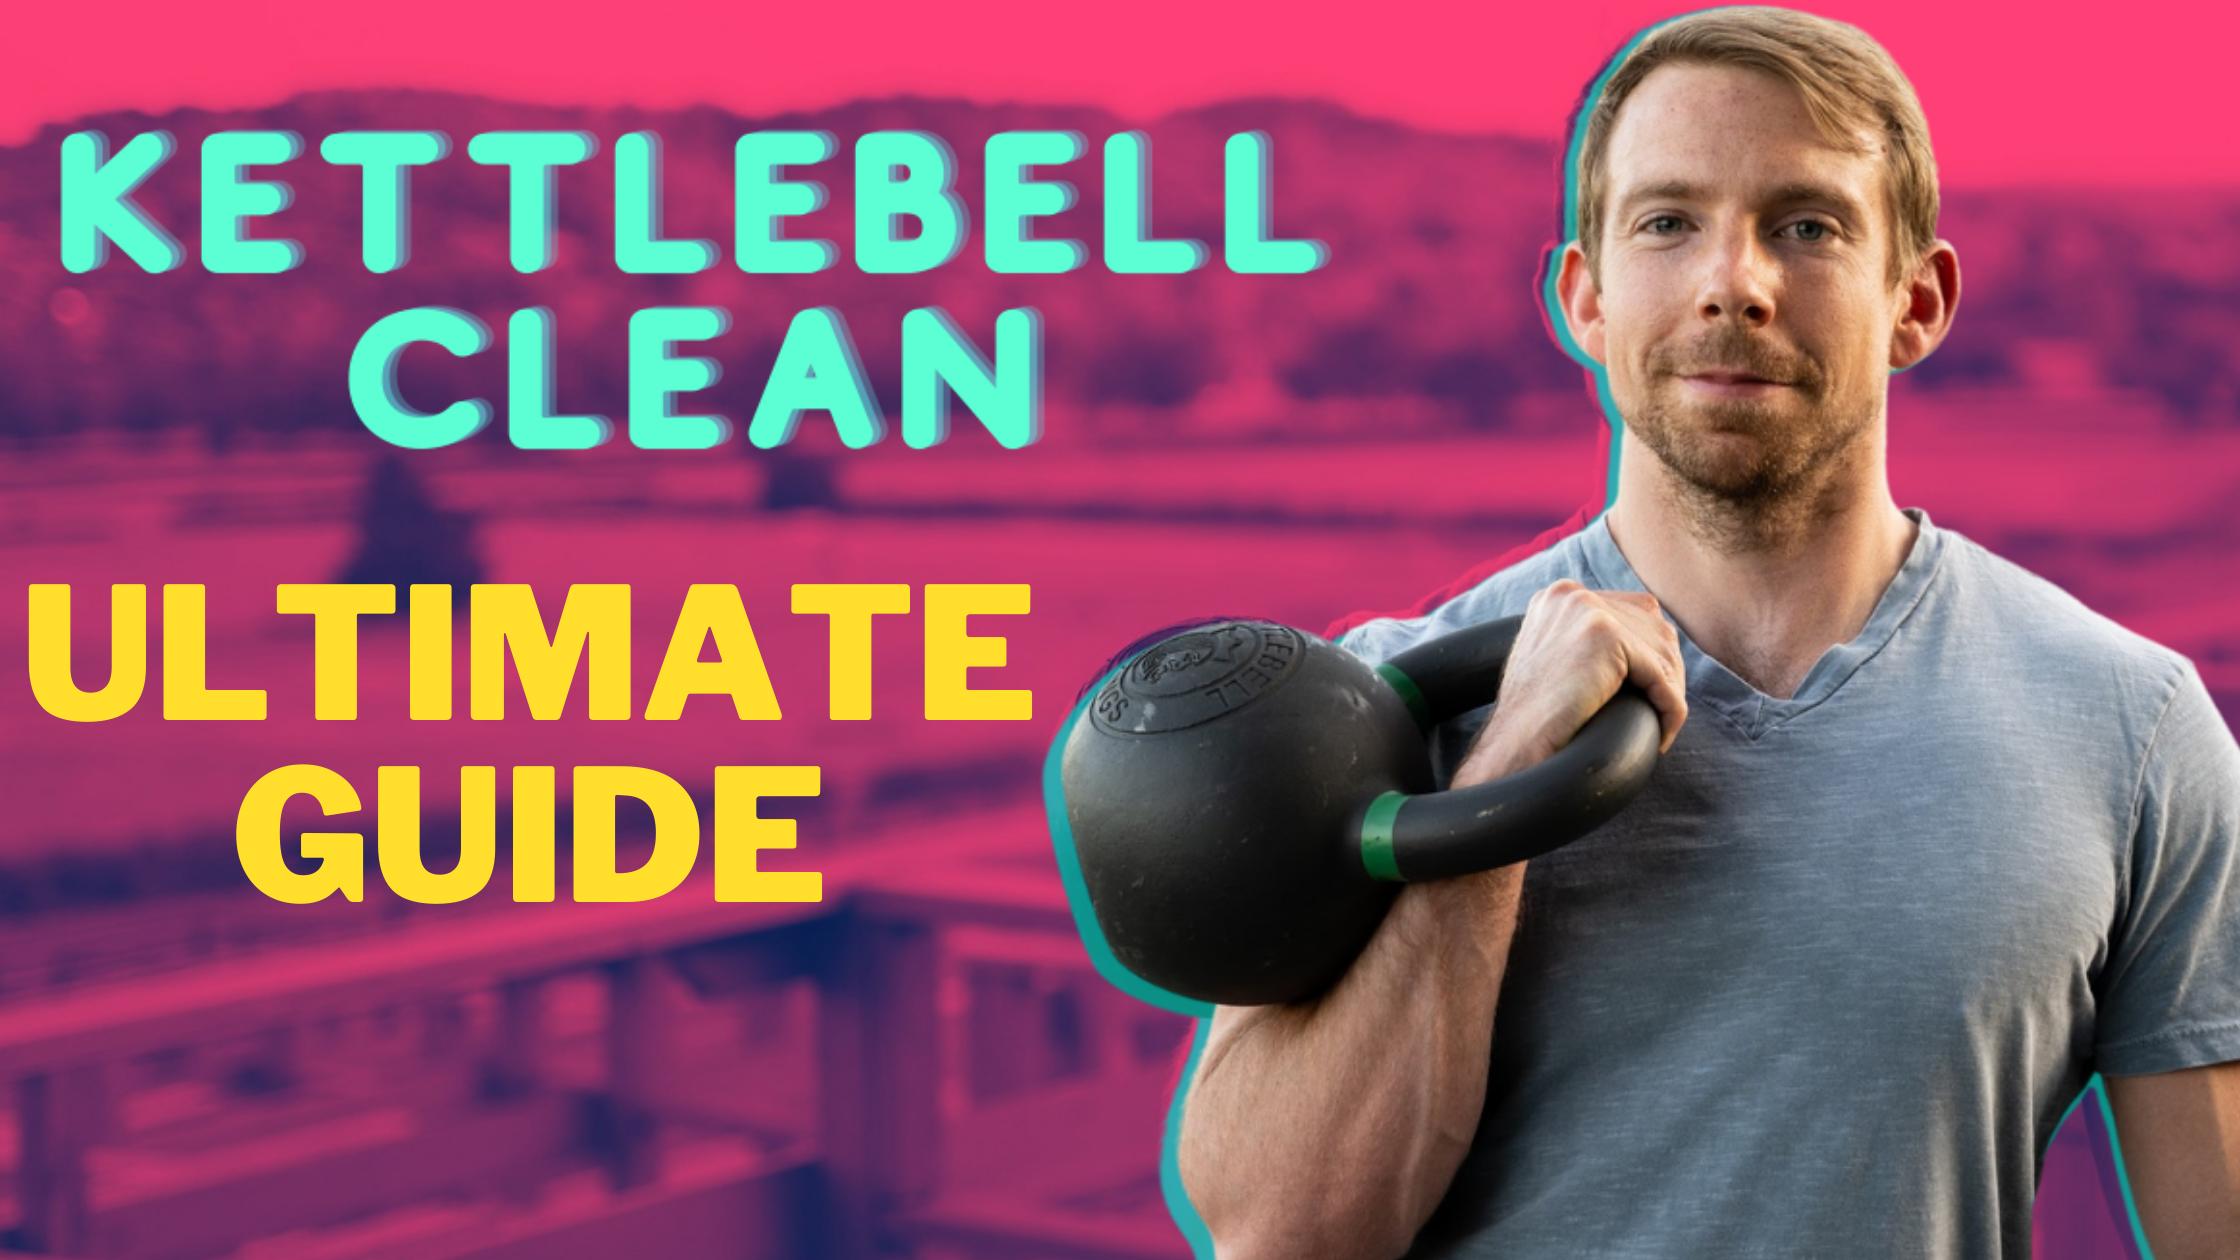 How to Kettlebell Clean (Ultimate Guide)